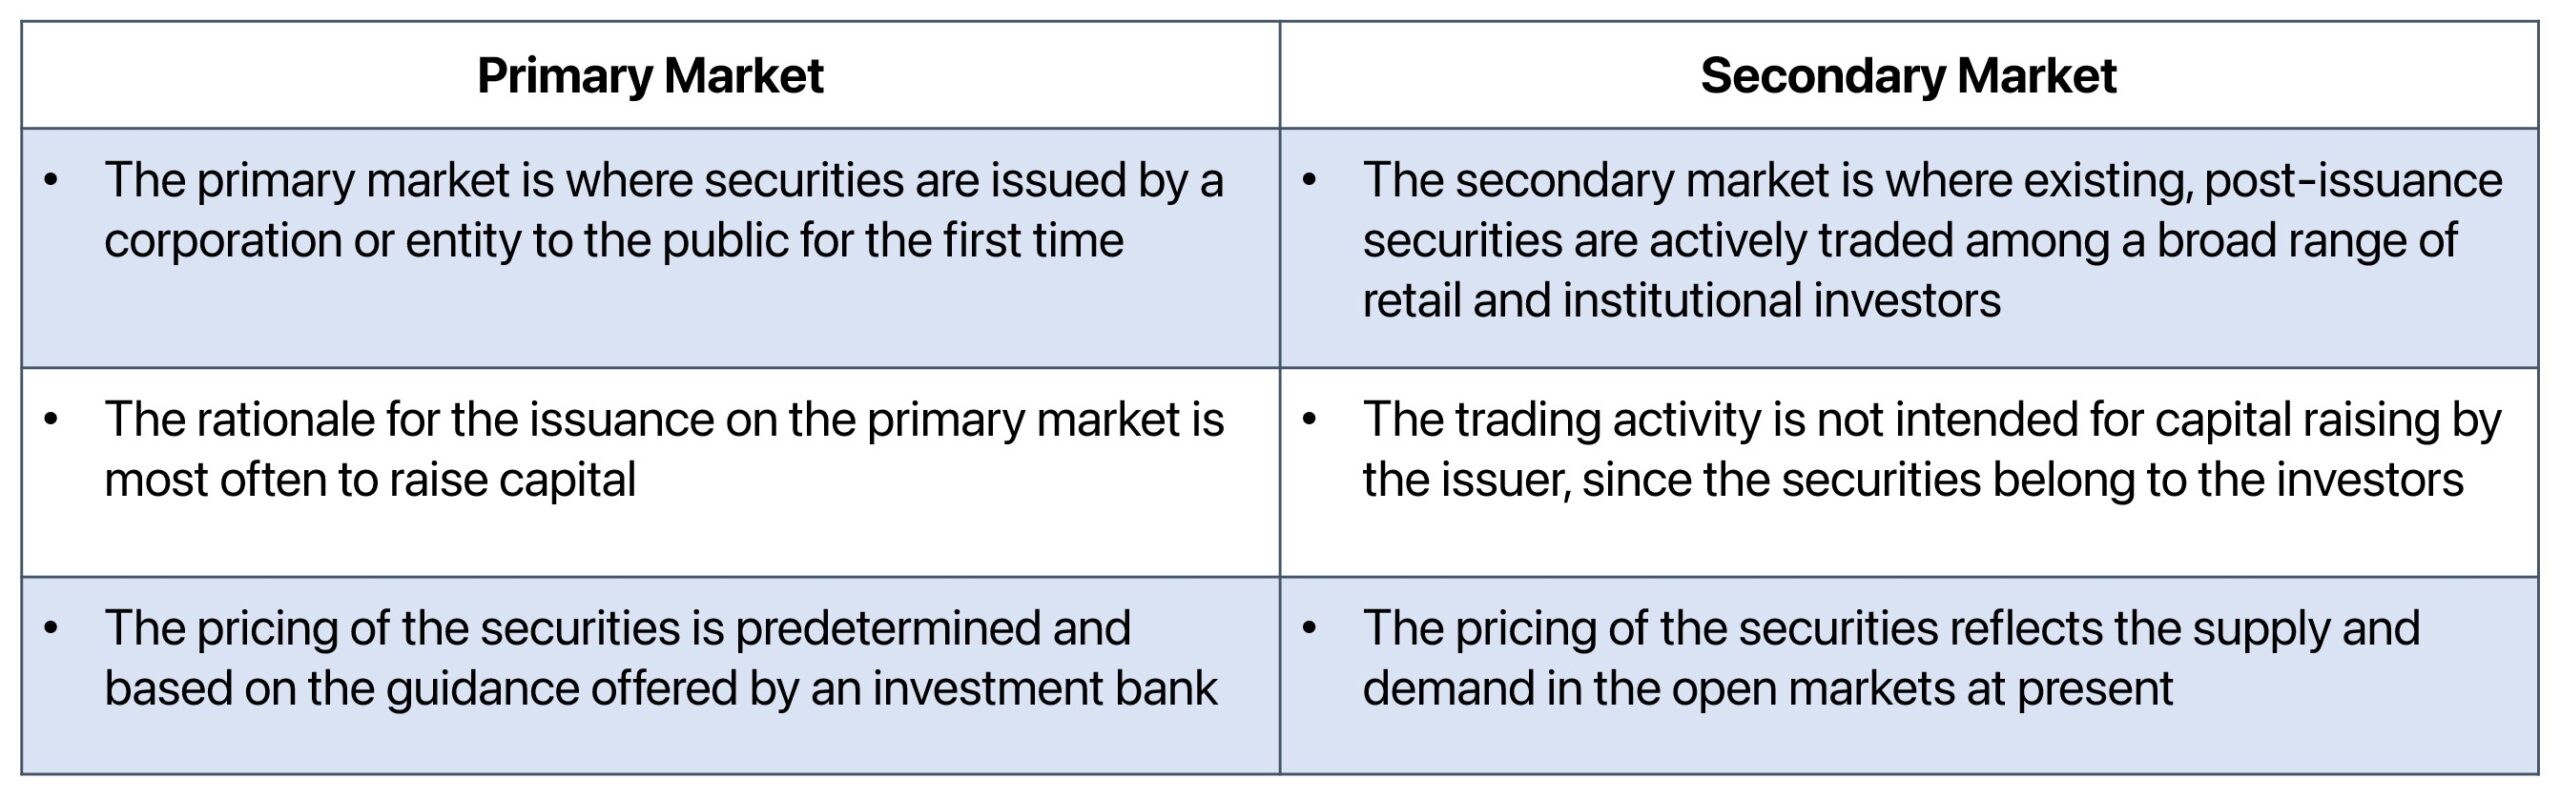 Primary vs Secondary Market - What’s the Difference?